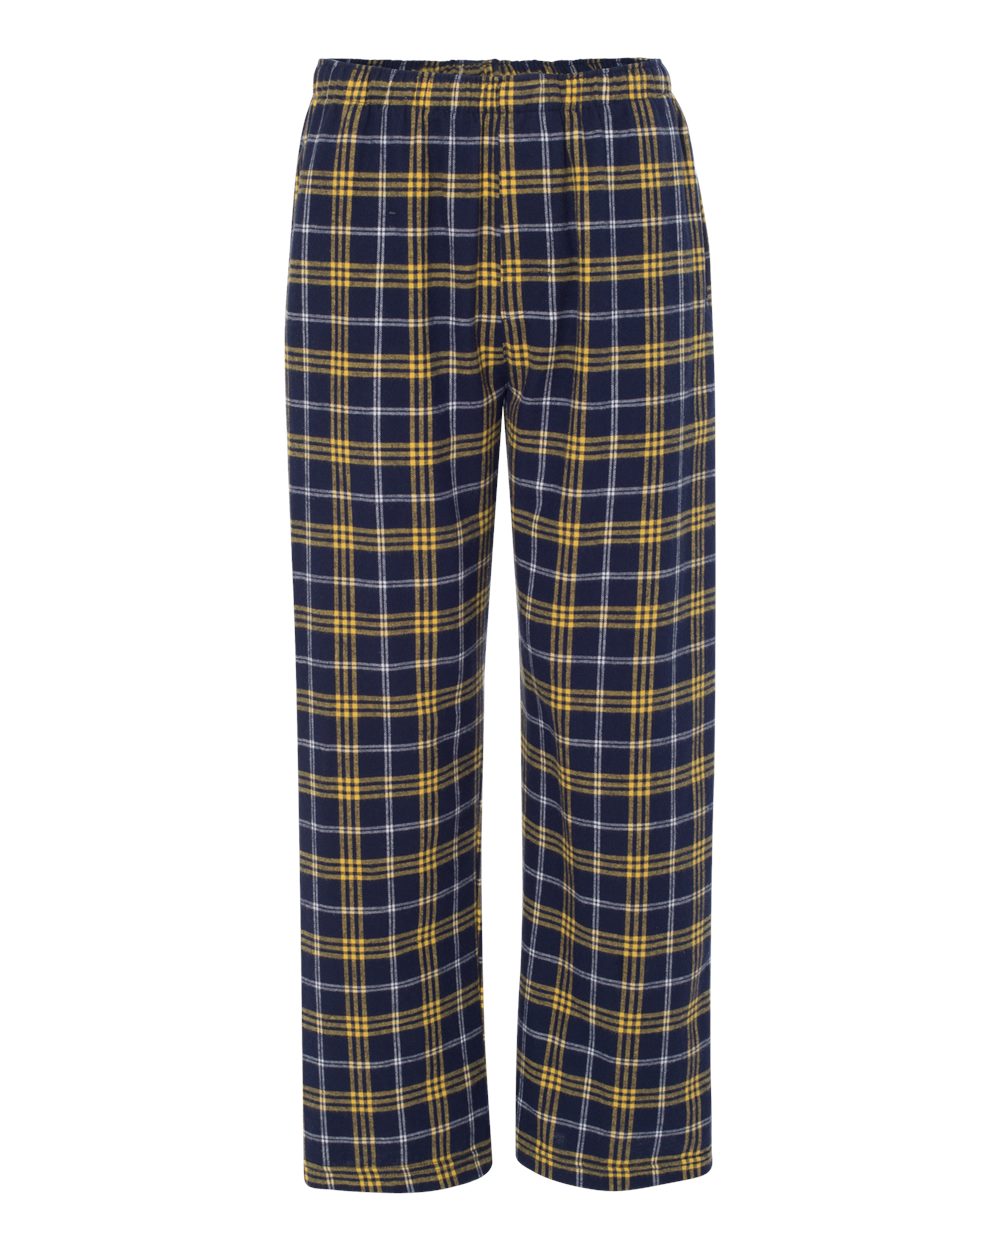 Flannel Pants with Pockets-Boxercraft